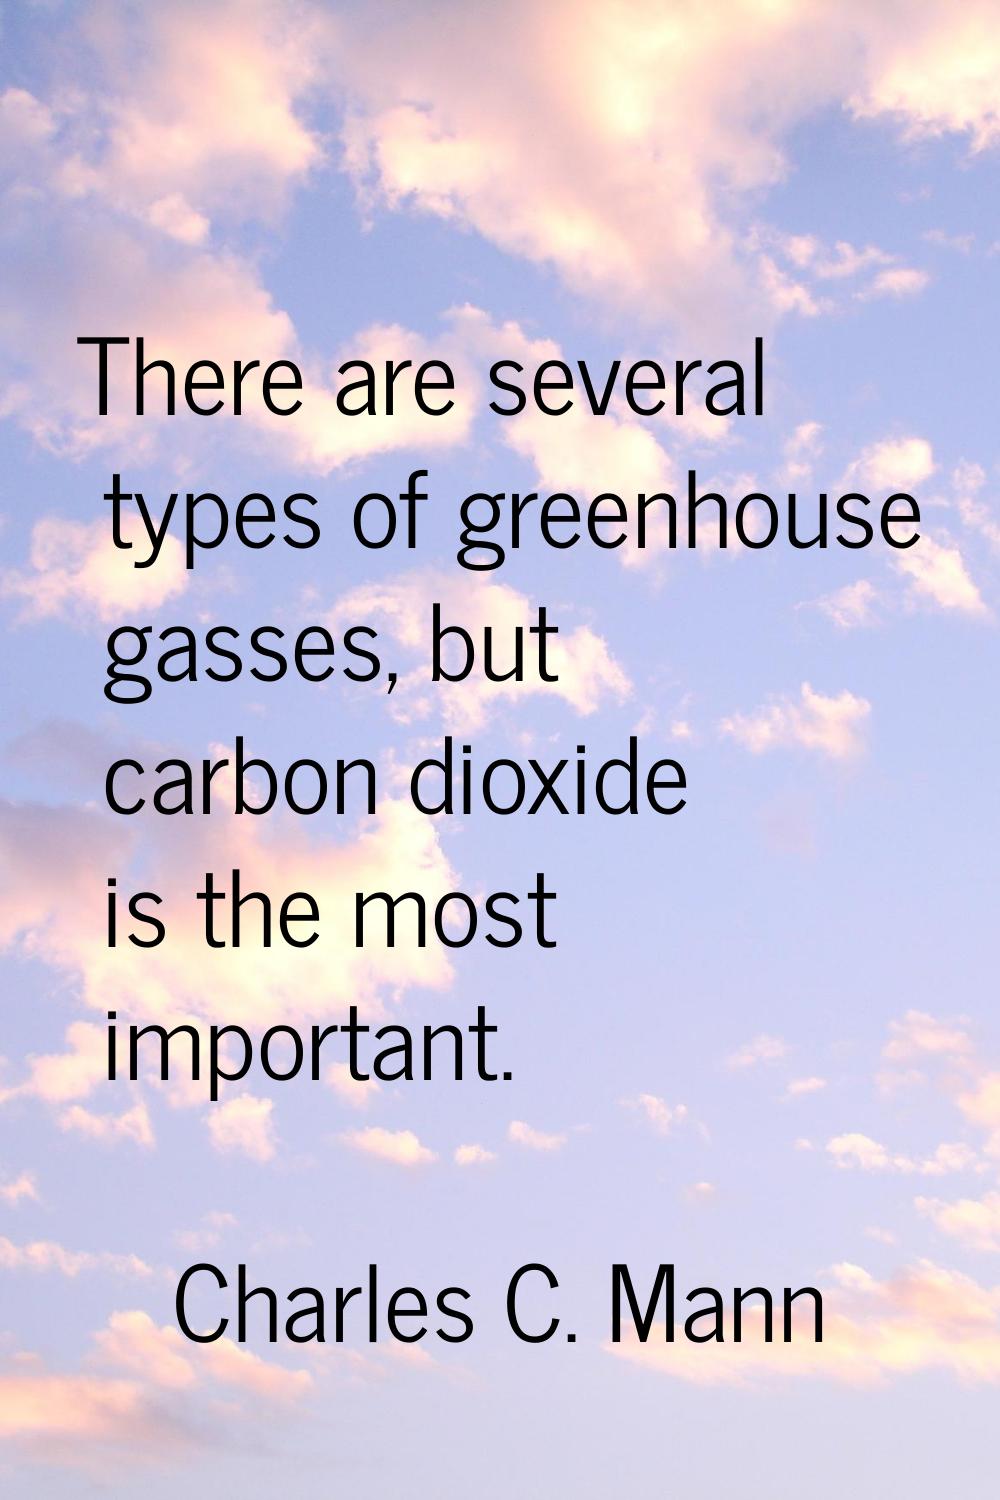 There are several types of greenhouse gasses, but carbon dioxide is the most important.